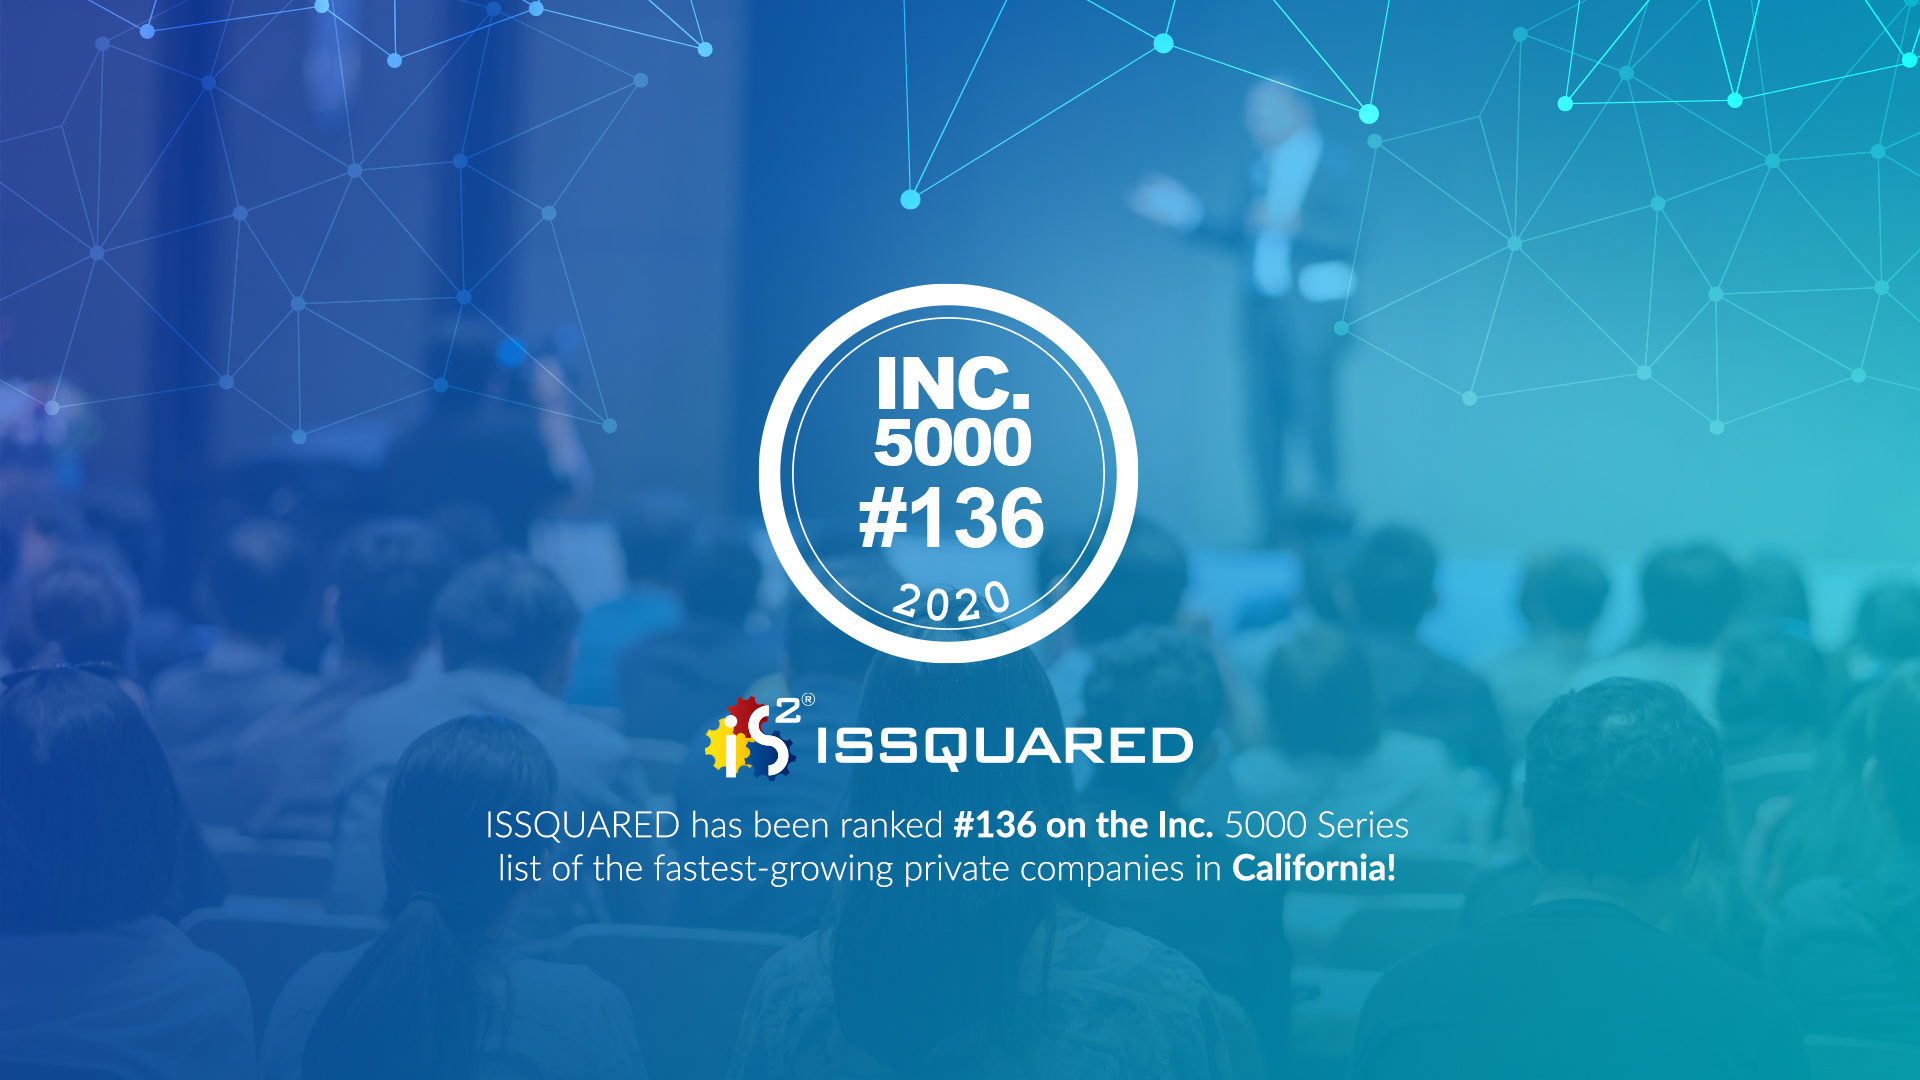 ISSQUARED® recognized as one of the fastest-growing private companies in California